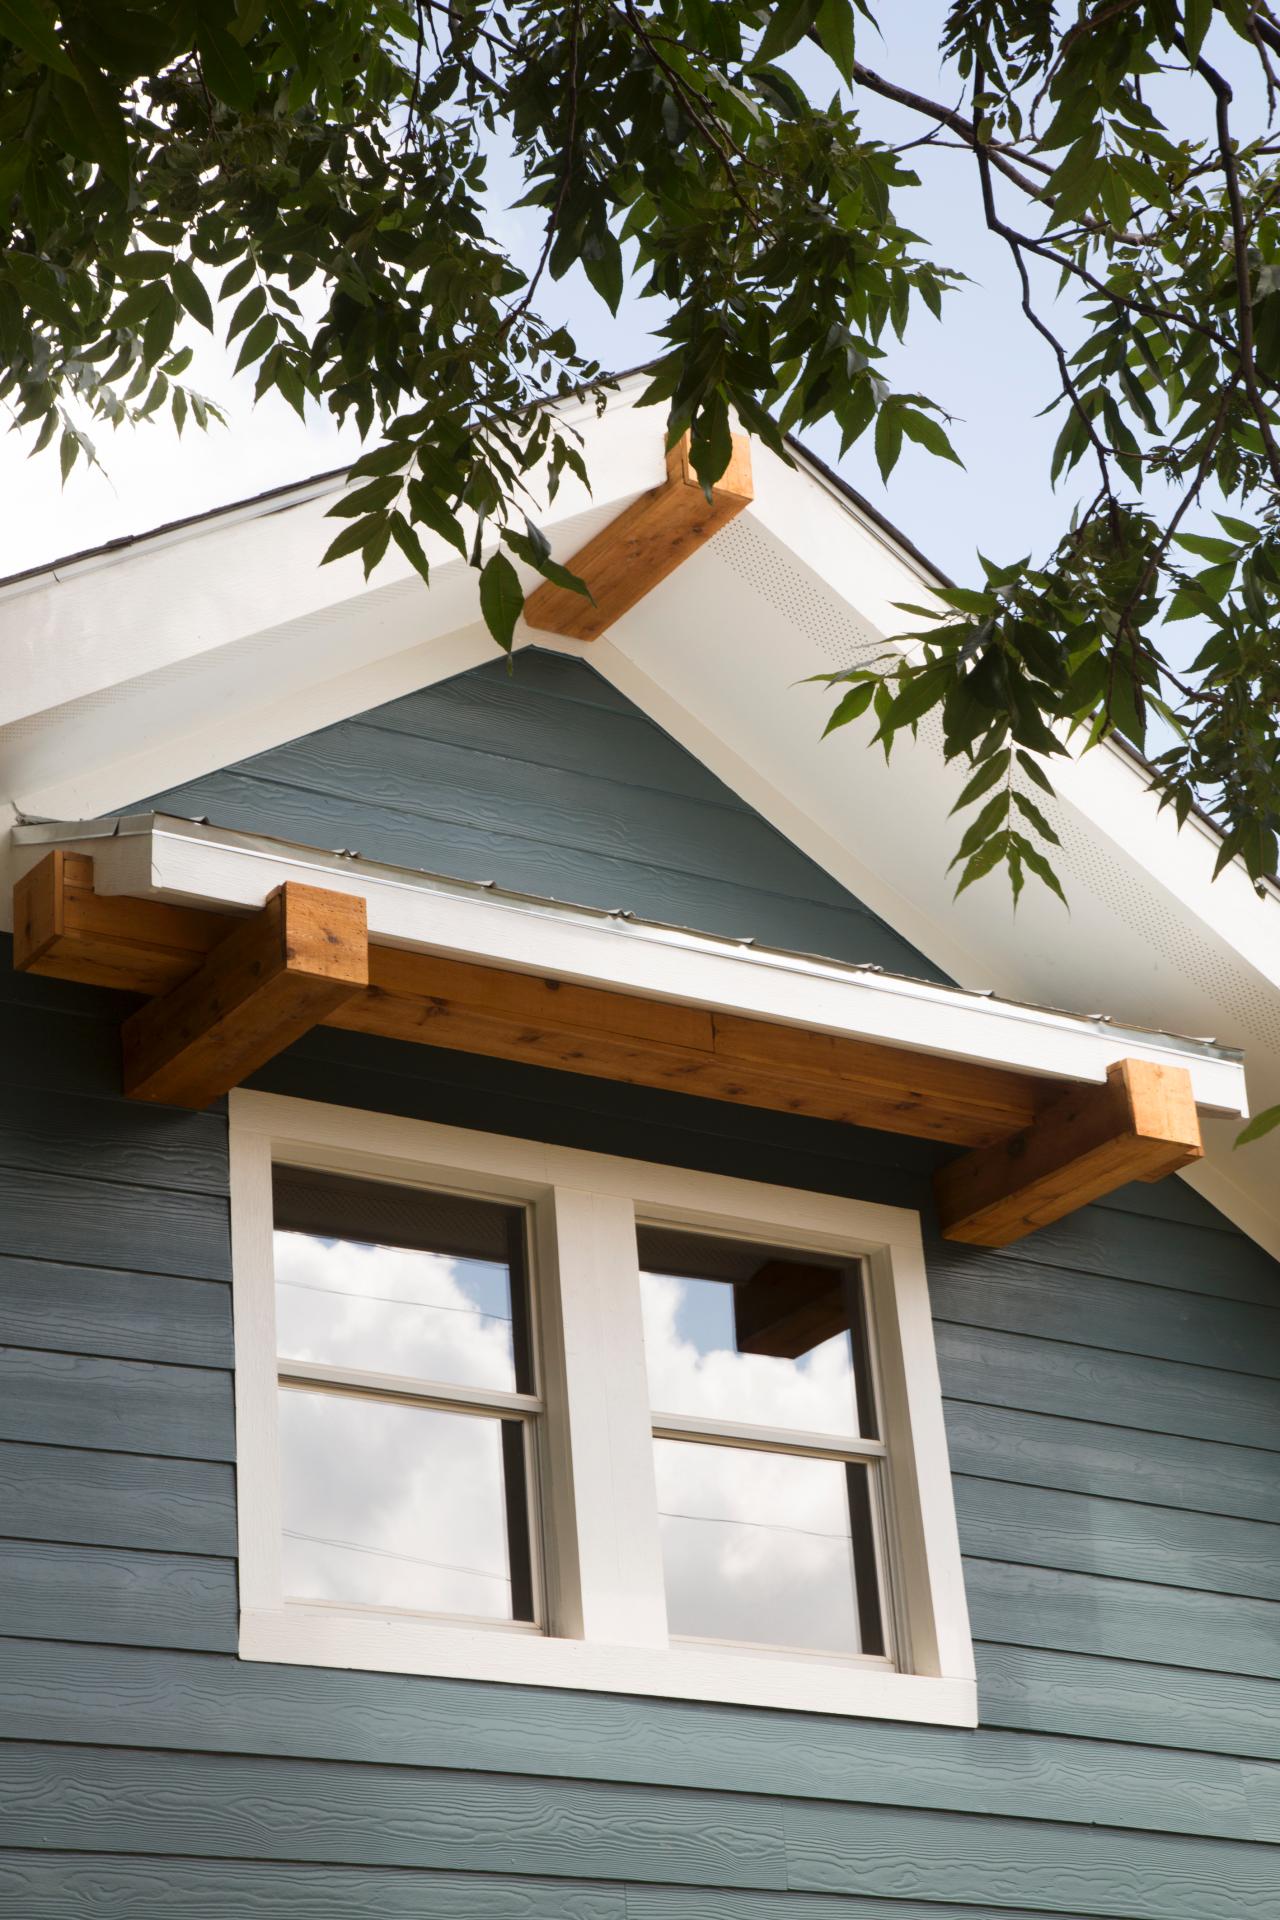 Have It Made In The Shade With The Right Window Awnings DIY